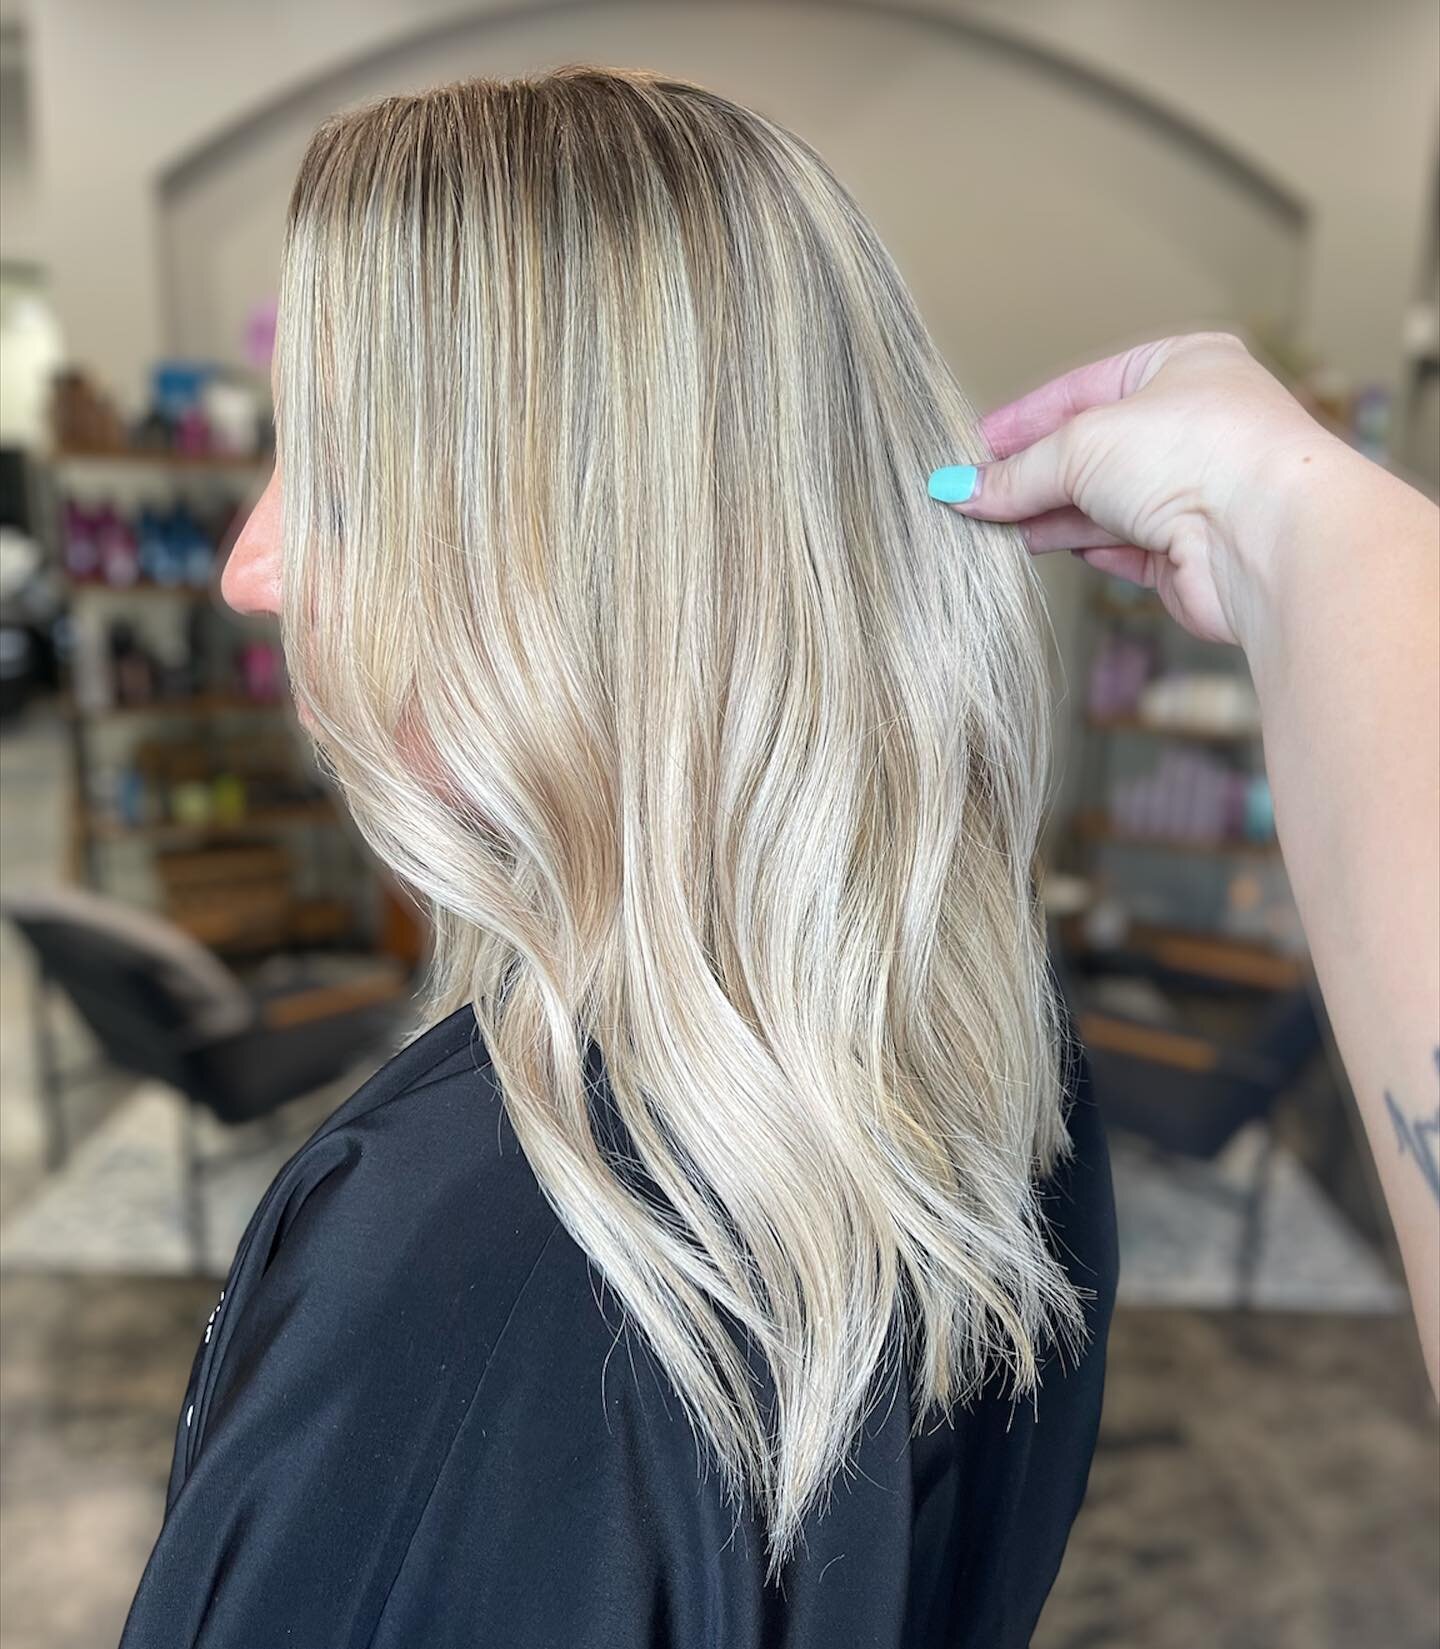 Healthy blonde is the best blonde ✨💁🏼&zwj;♀️ Be sure to check out our olaplex special!
By @taylorbrooke.hair 
&bull;
&bull;
&bull;
 #blondehair #warmblonde #honeyblonde #blondehighlights #teasylights #balayage #warmbalayage #blondebalayage #softwav